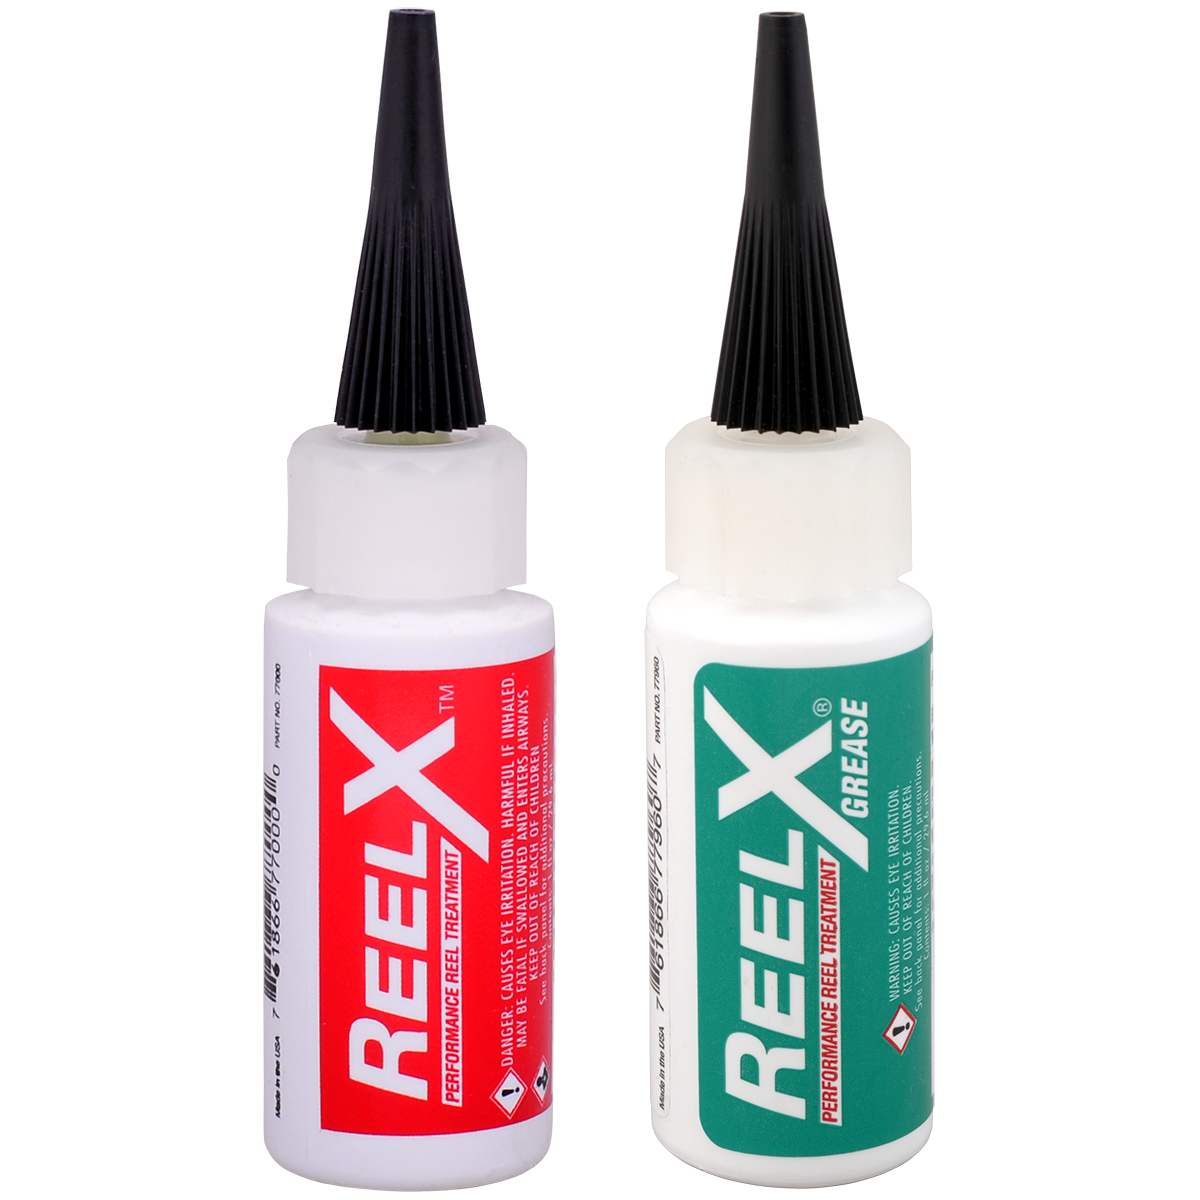  Clenzoil Marine & Tackle Rust Prevention Spray